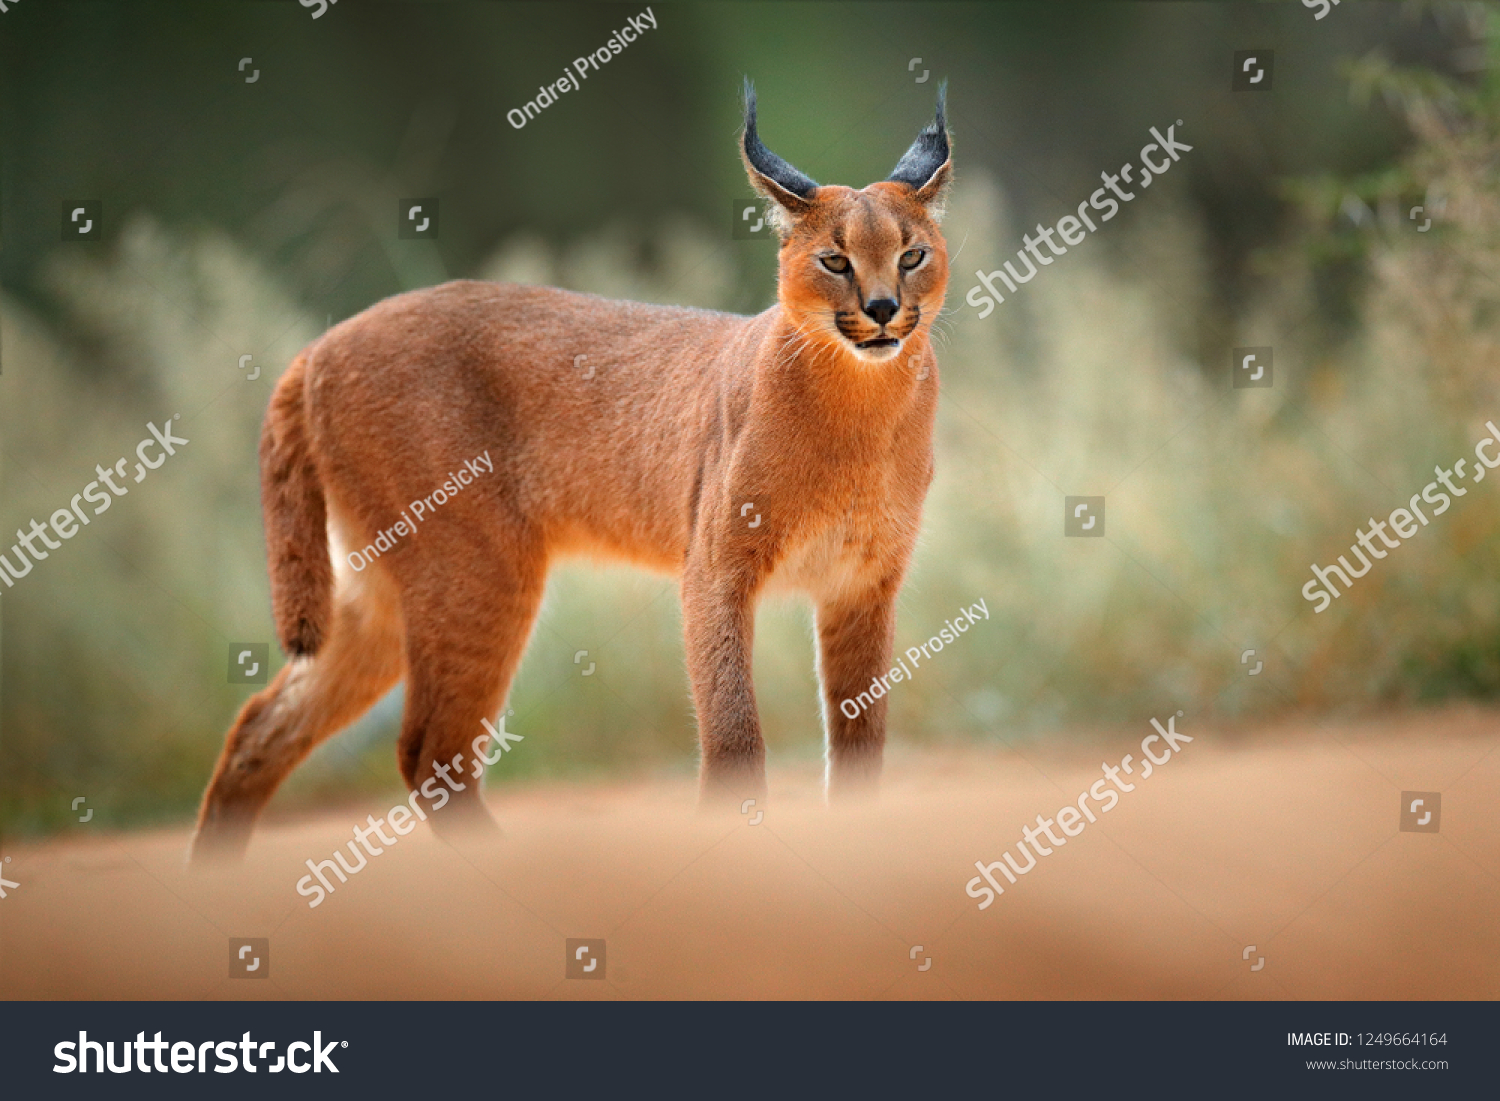 Caracal, African lynx, in green grass vegetation. Beautiful wild cat in nature habitat, Botswana, South Africa. Animal face to face walking on gravel road, Felis caracal. Wildlife scene from nature. #1249664164